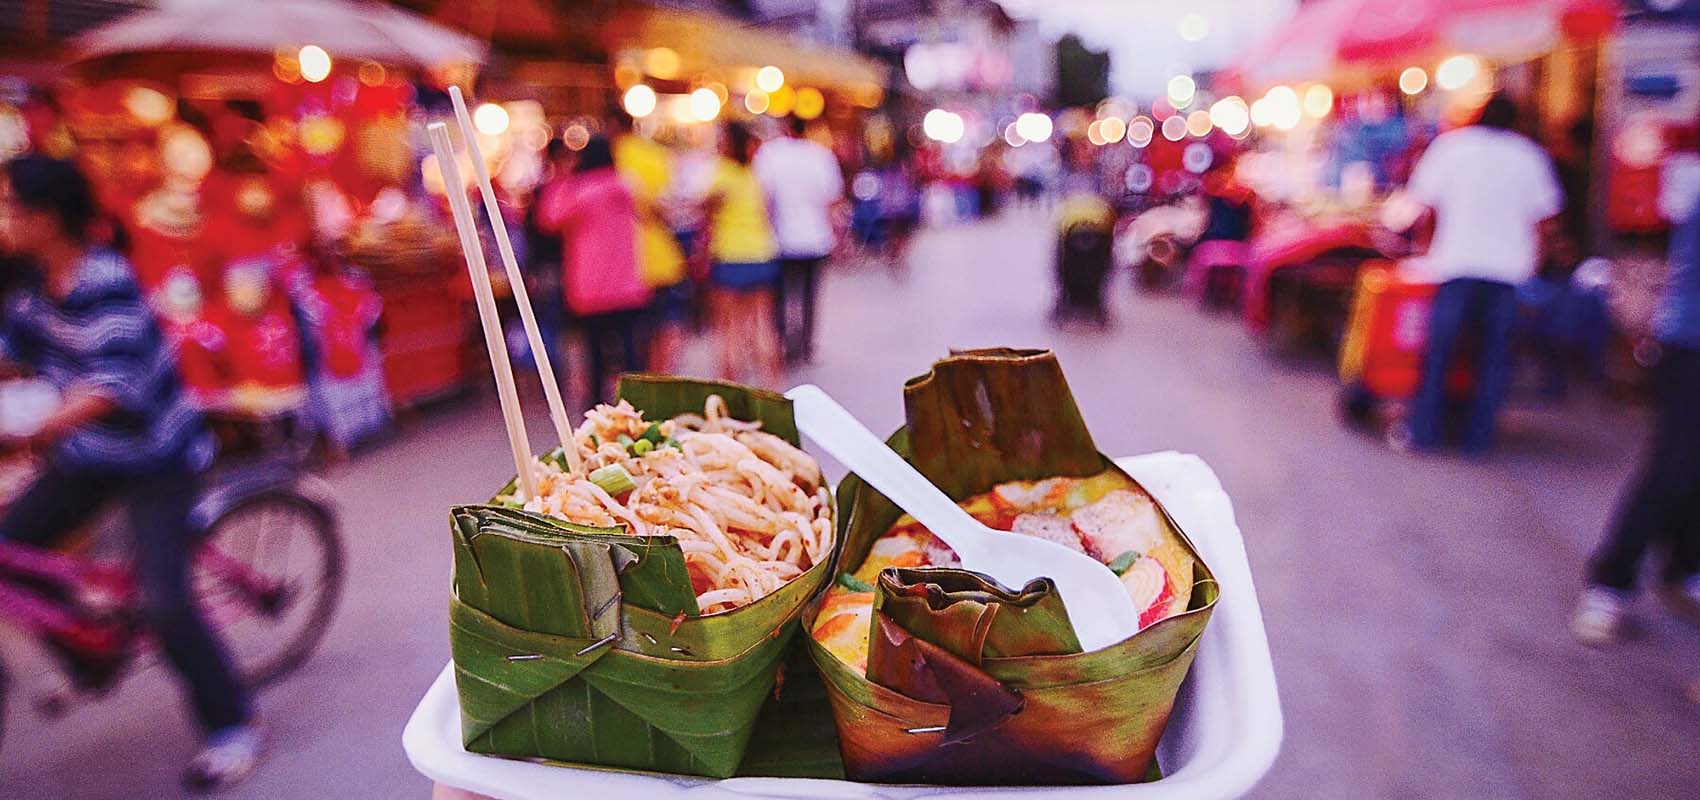 Food festival market with two meals in banana leaf containers